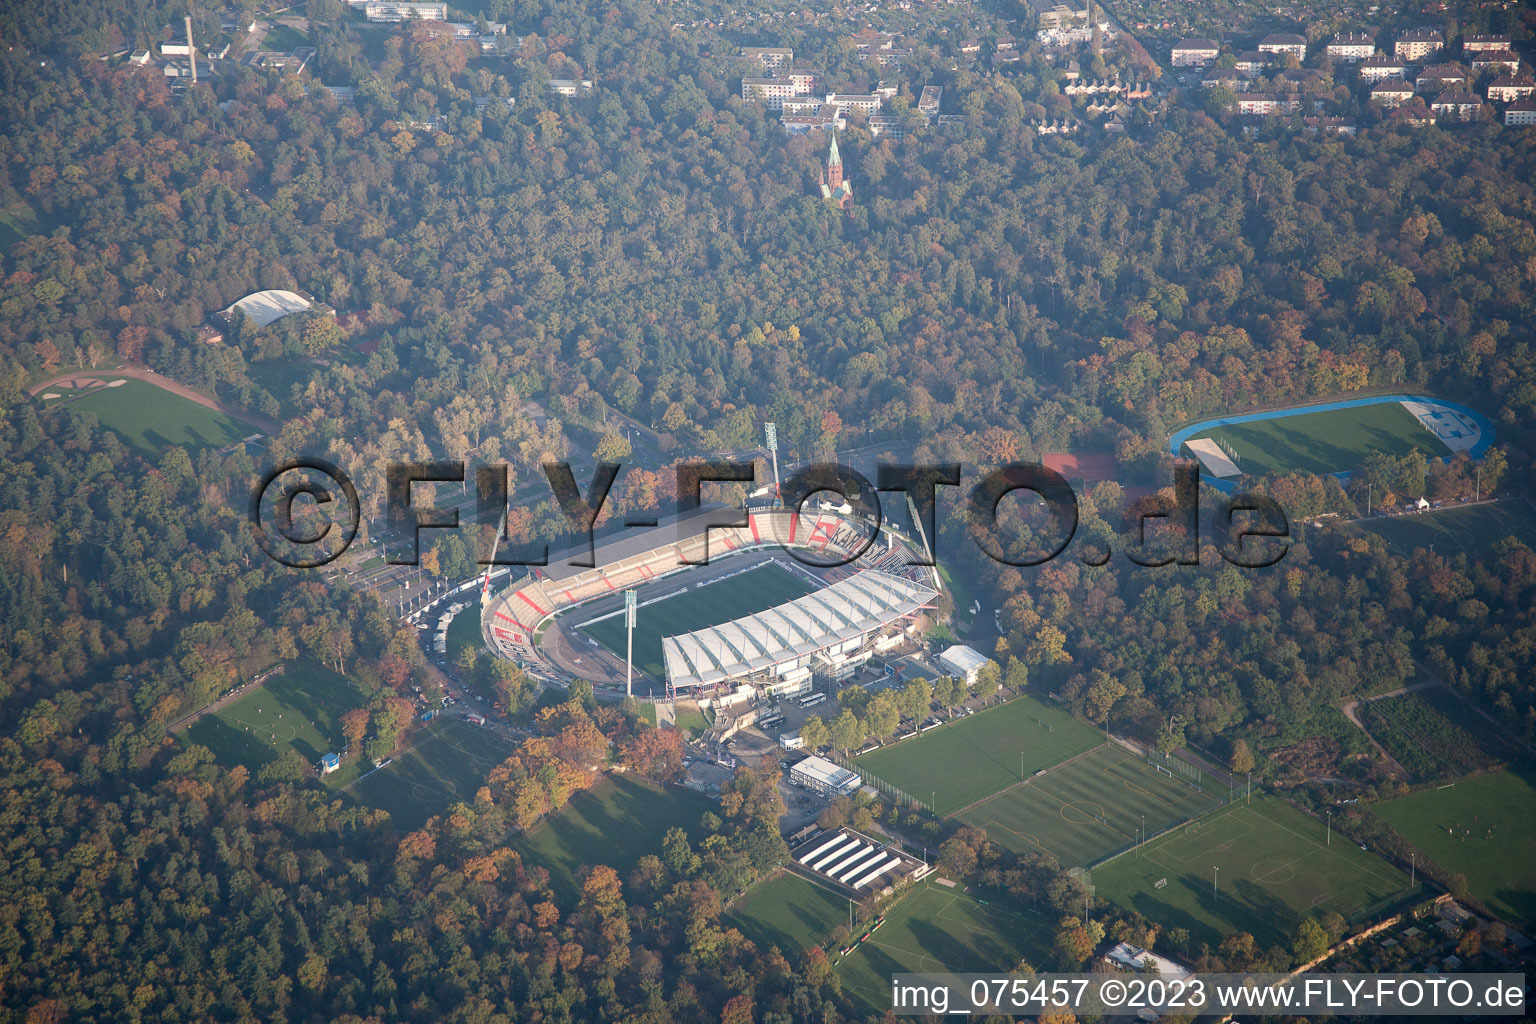 Aerial view of Stadion in the district Innenstadt-Ost in Karlsruhe in the state Baden-Wuerttemberg, Germany